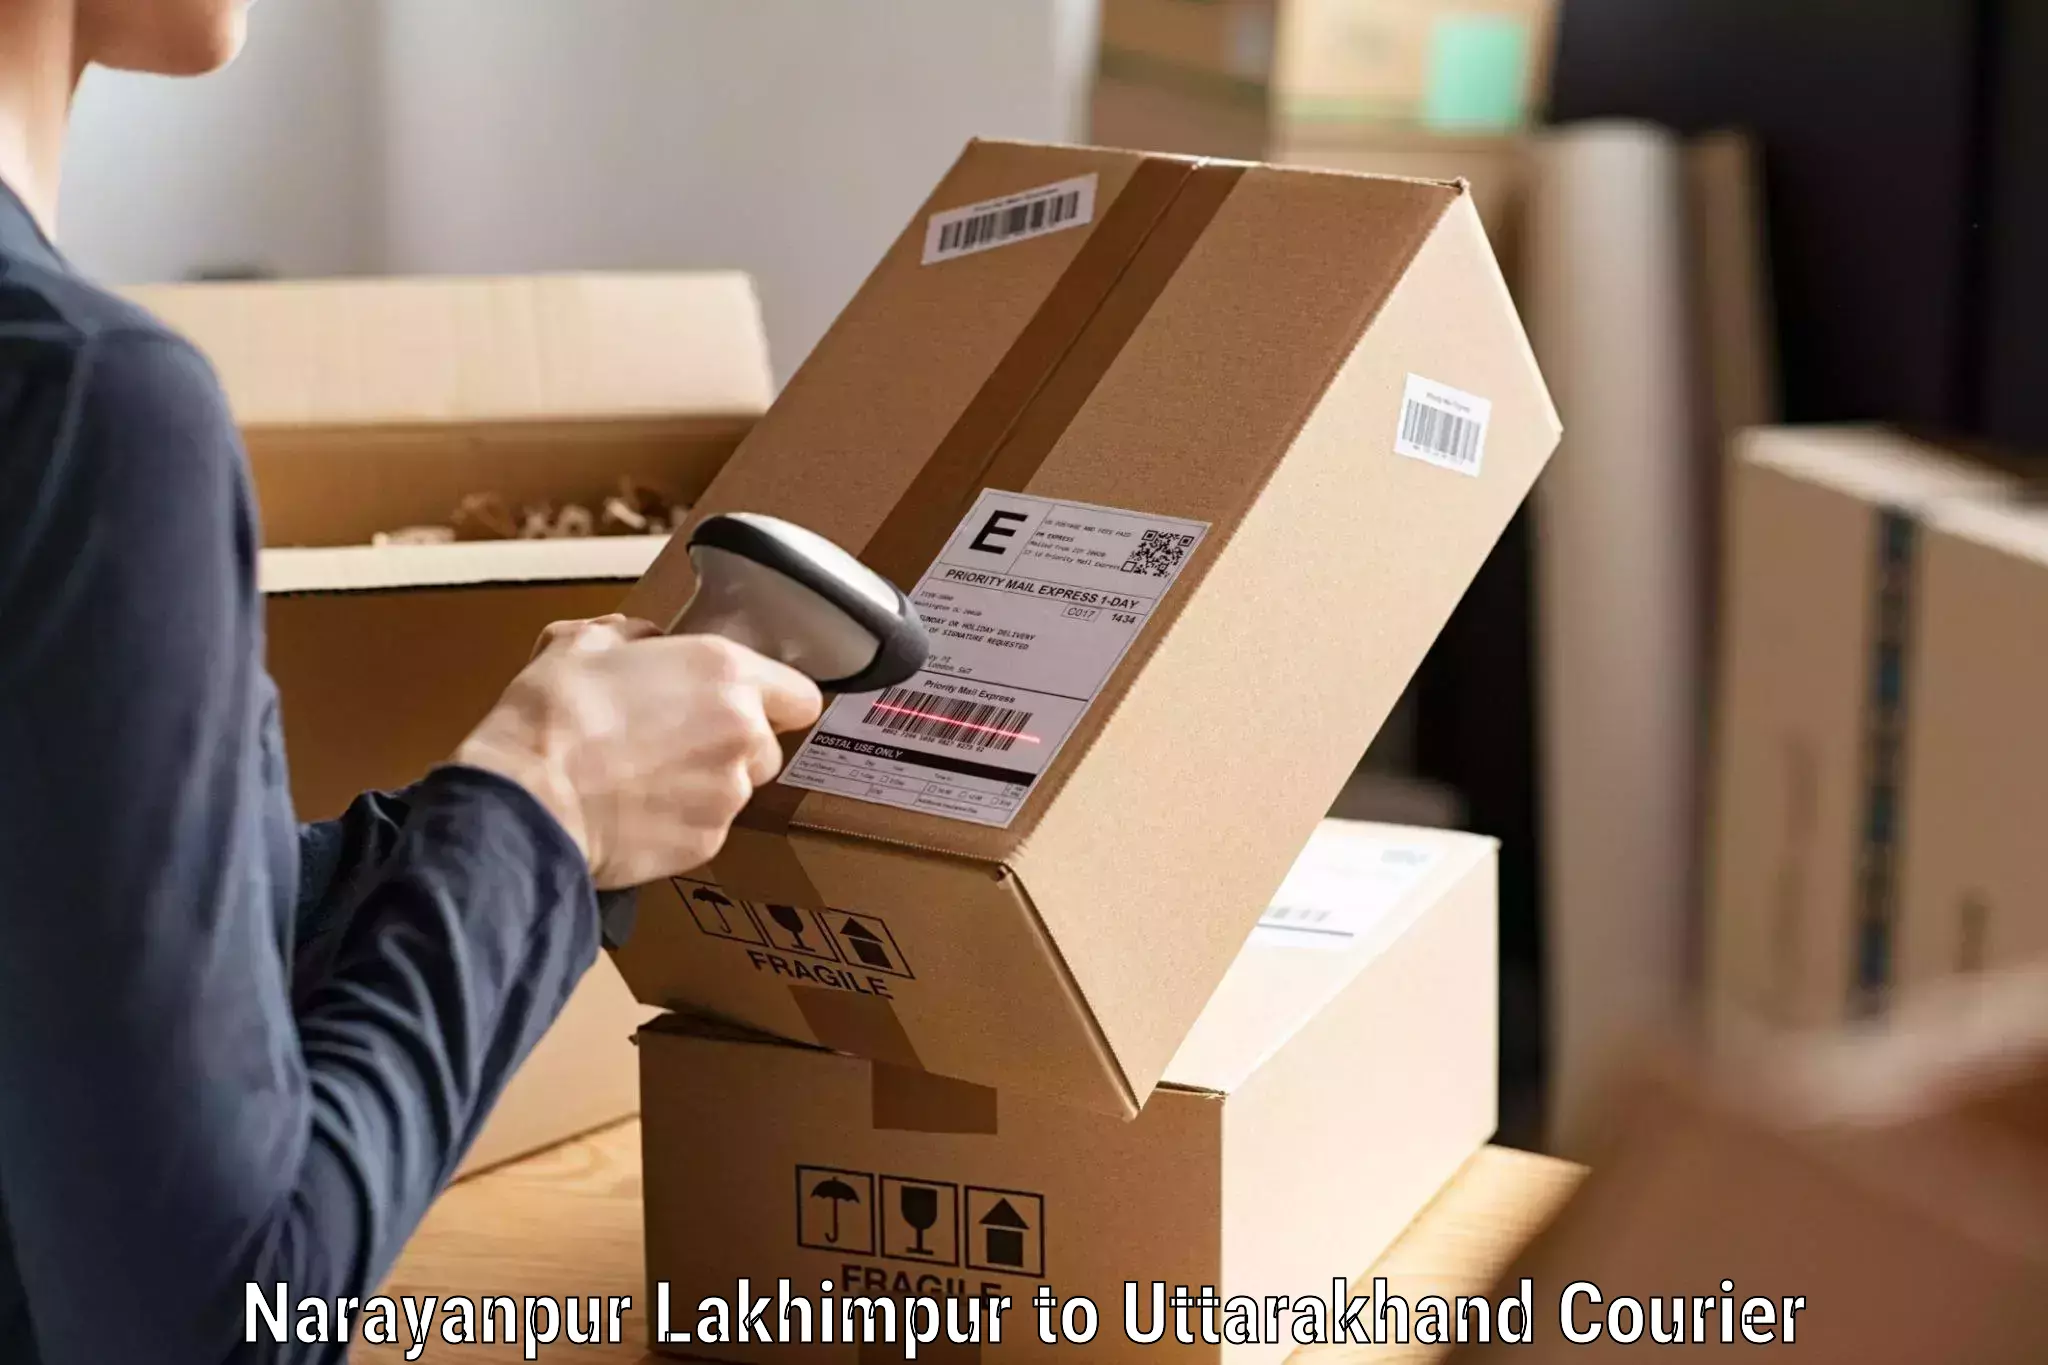 Courier dispatch services Narayanpur Lakhimpur to Mussoorie